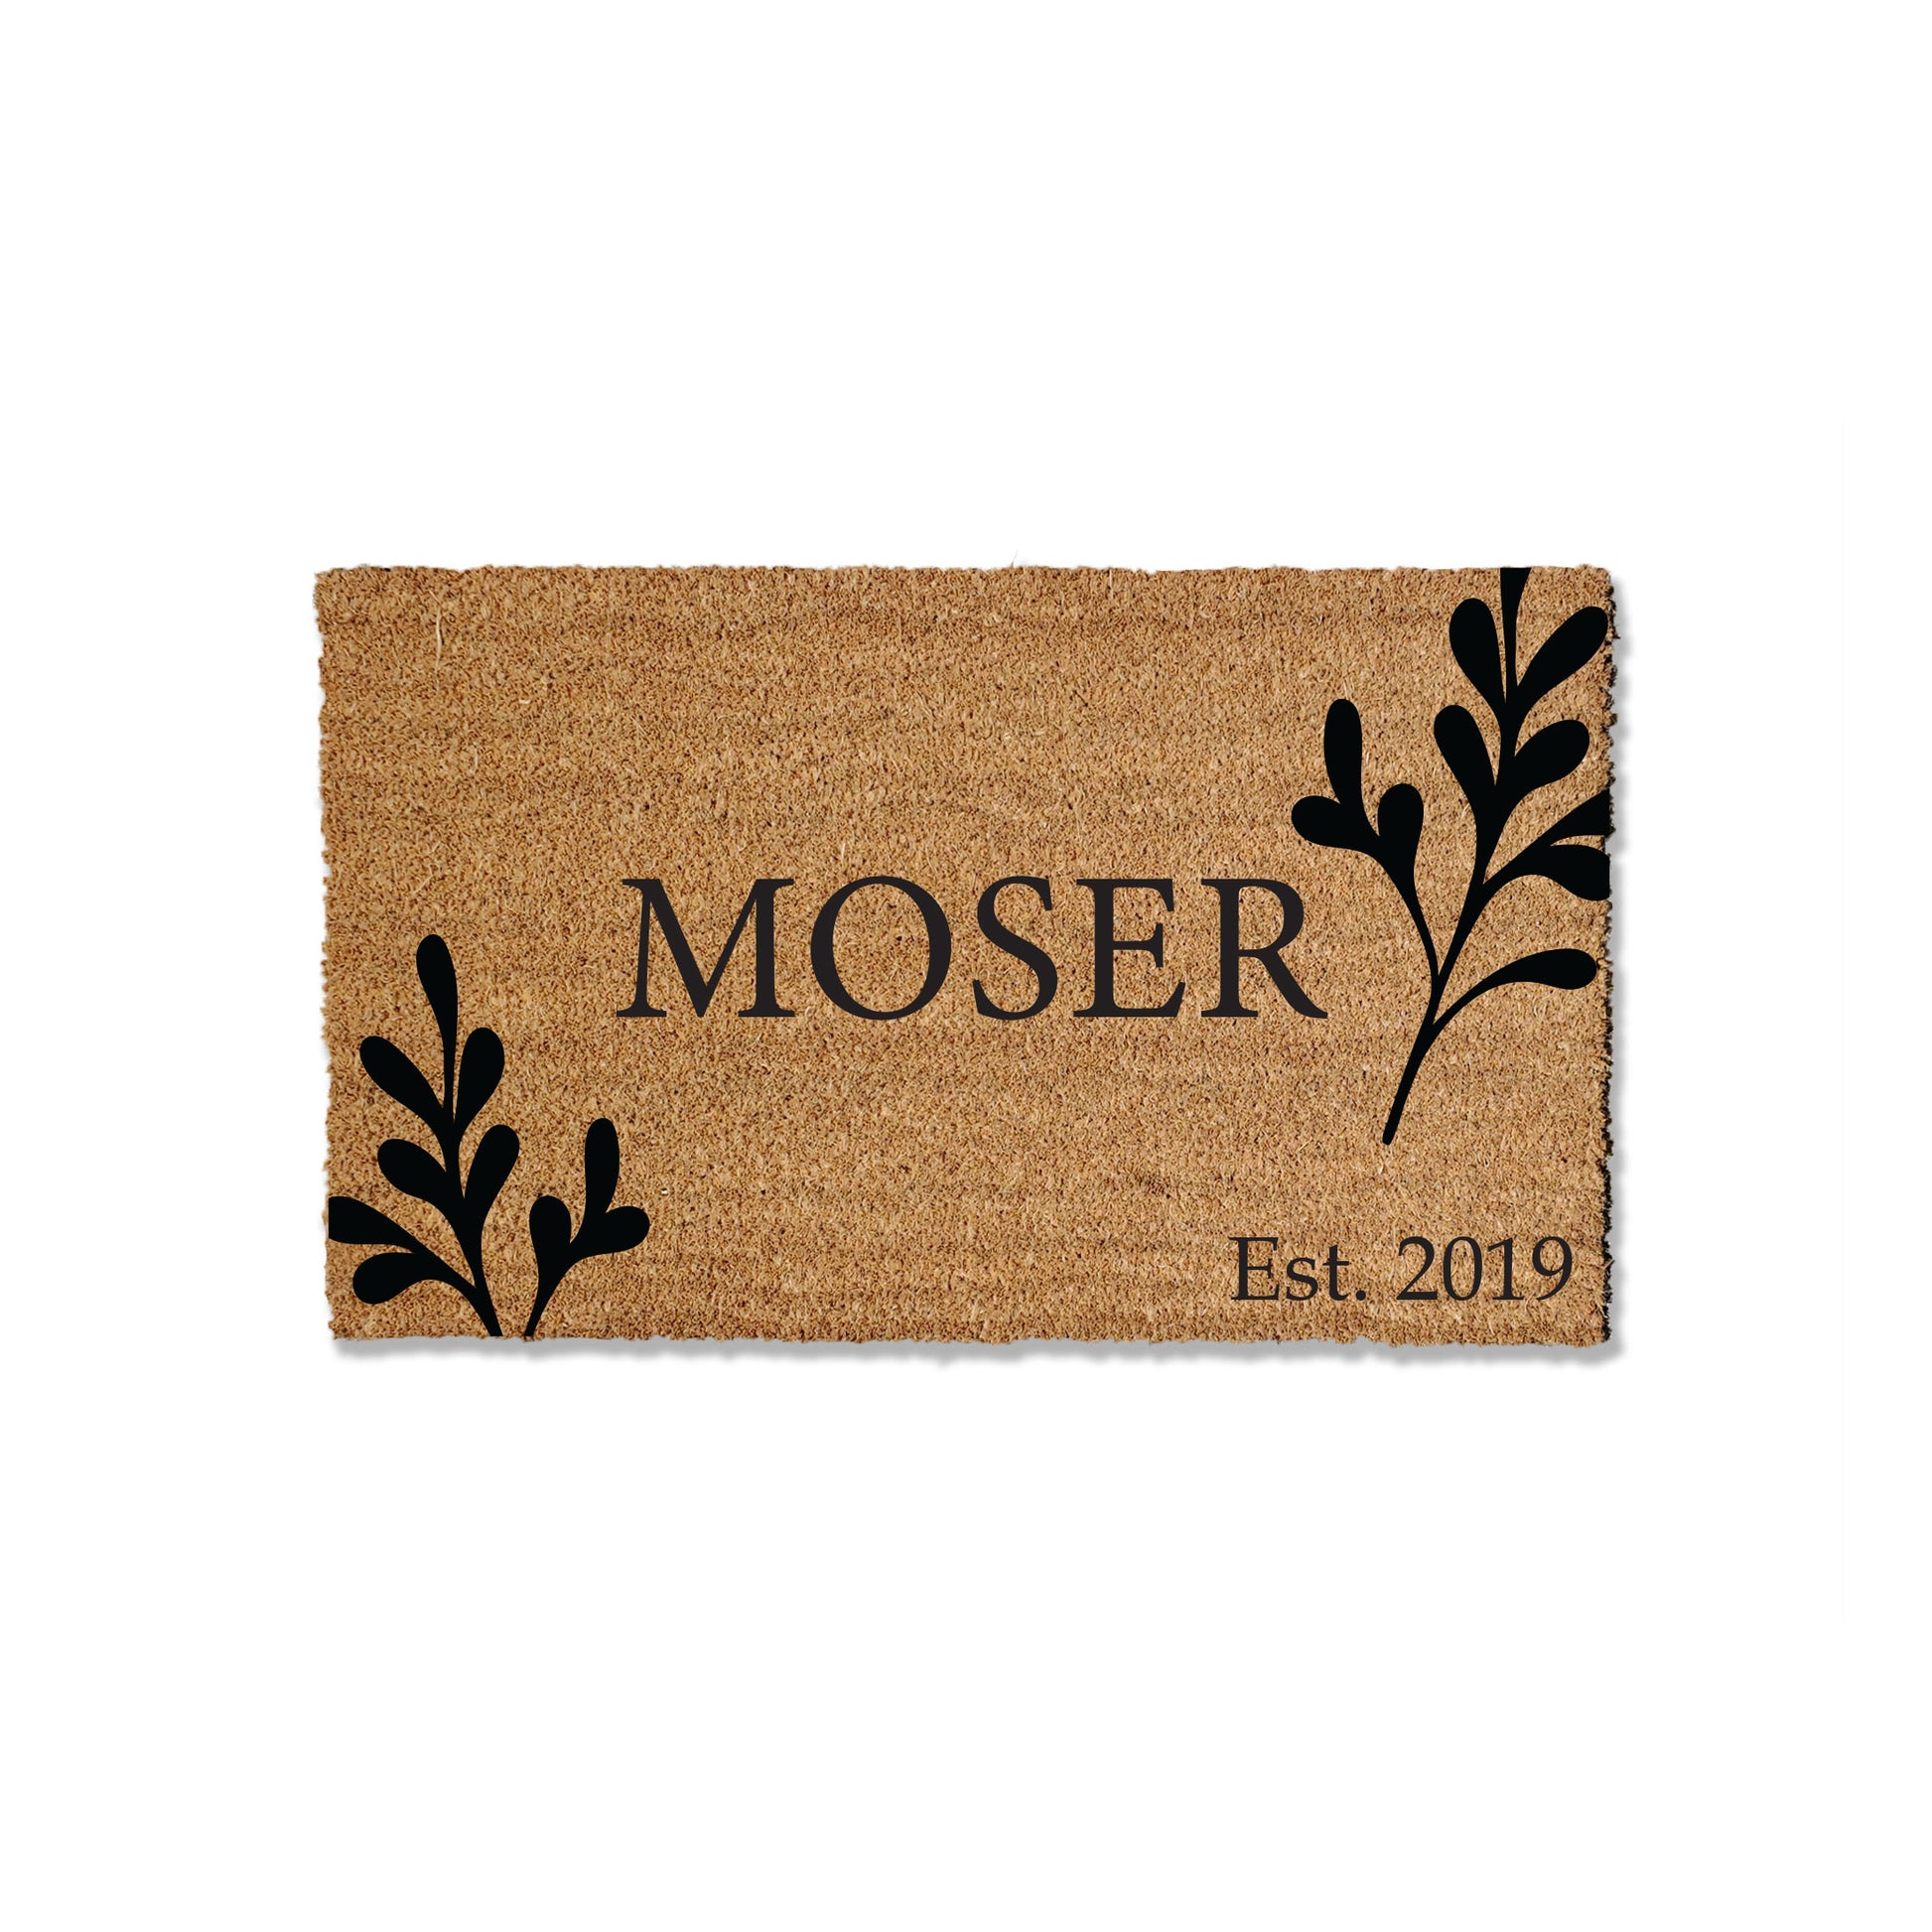 Discover our custom coir doormat, offered in various sizes. Add a personal touch to your entryway by customizing with your last name and your established date. These coir doormats excel at trapping dirt, ensuring a cleaner home. Choose the perfect size to complete your entryway with style and functionality.